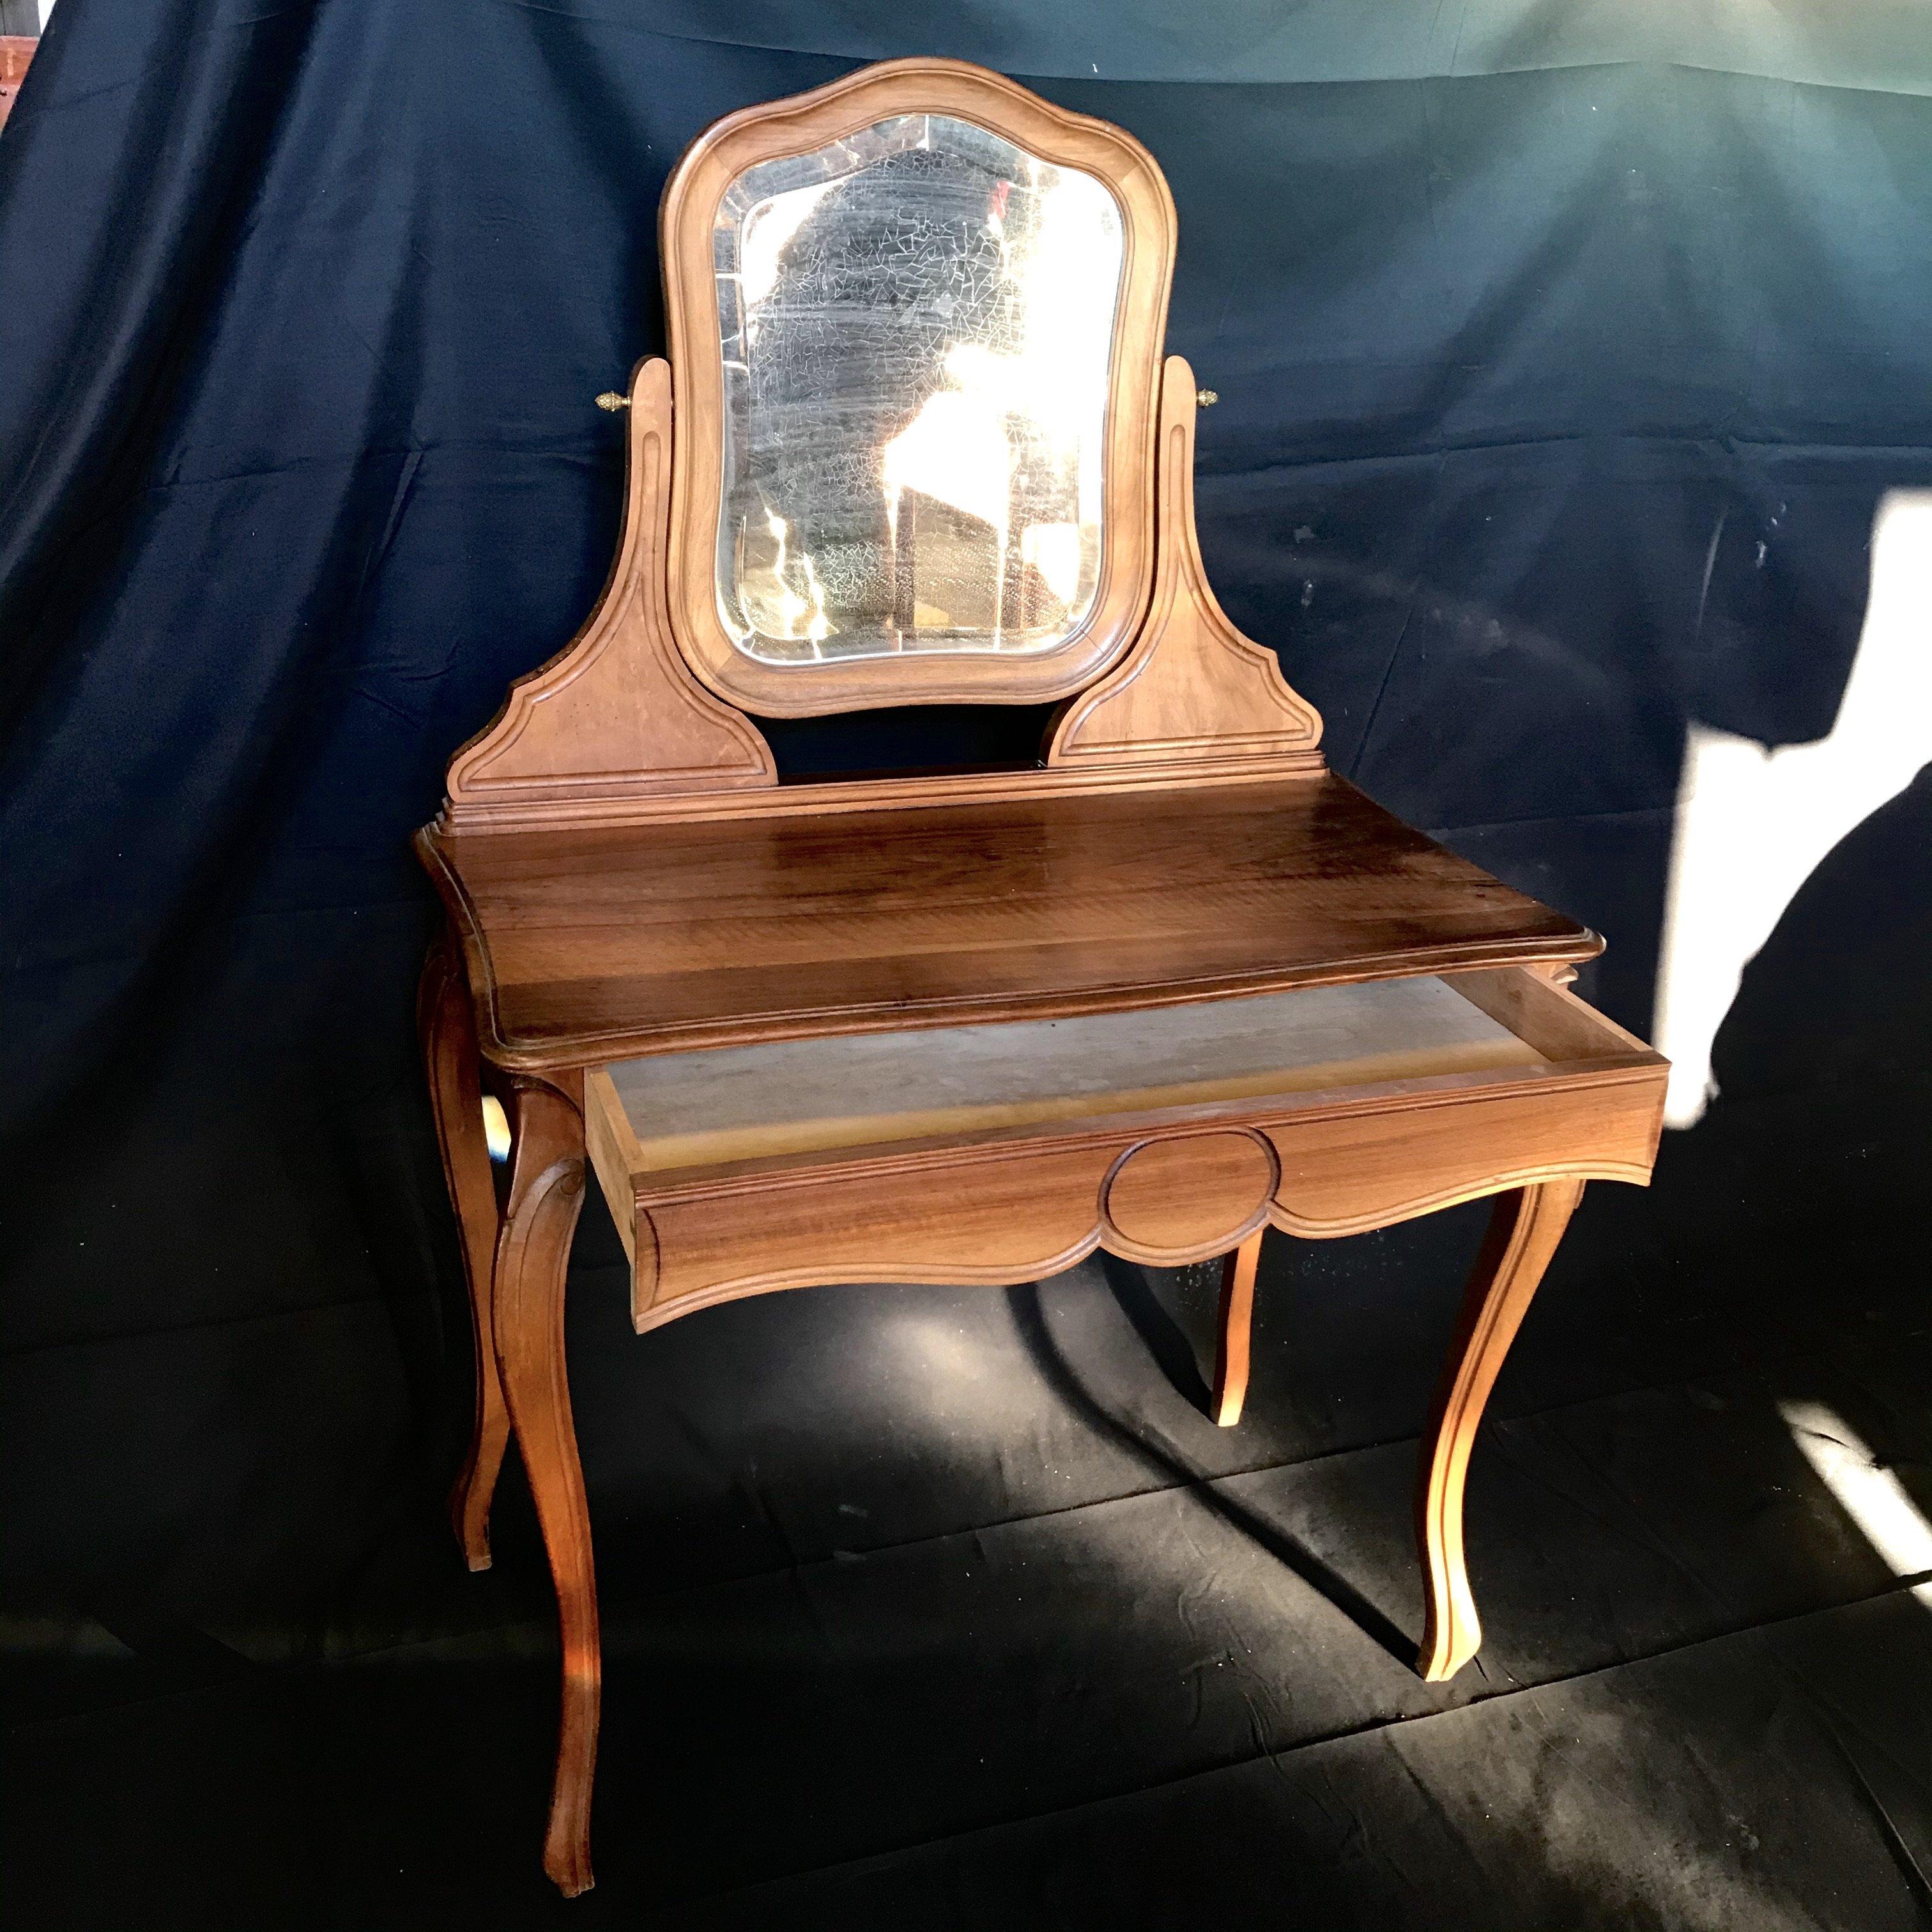 Beautiful French walnut dressing table or vanity with beveled mirror - bought in the South of France. Single drawer having scalloped bottom and handsome circle decoration and elegant cabriole legs.
 
 Measures: H desk top 30” H skirt 24.5” 
#4337.